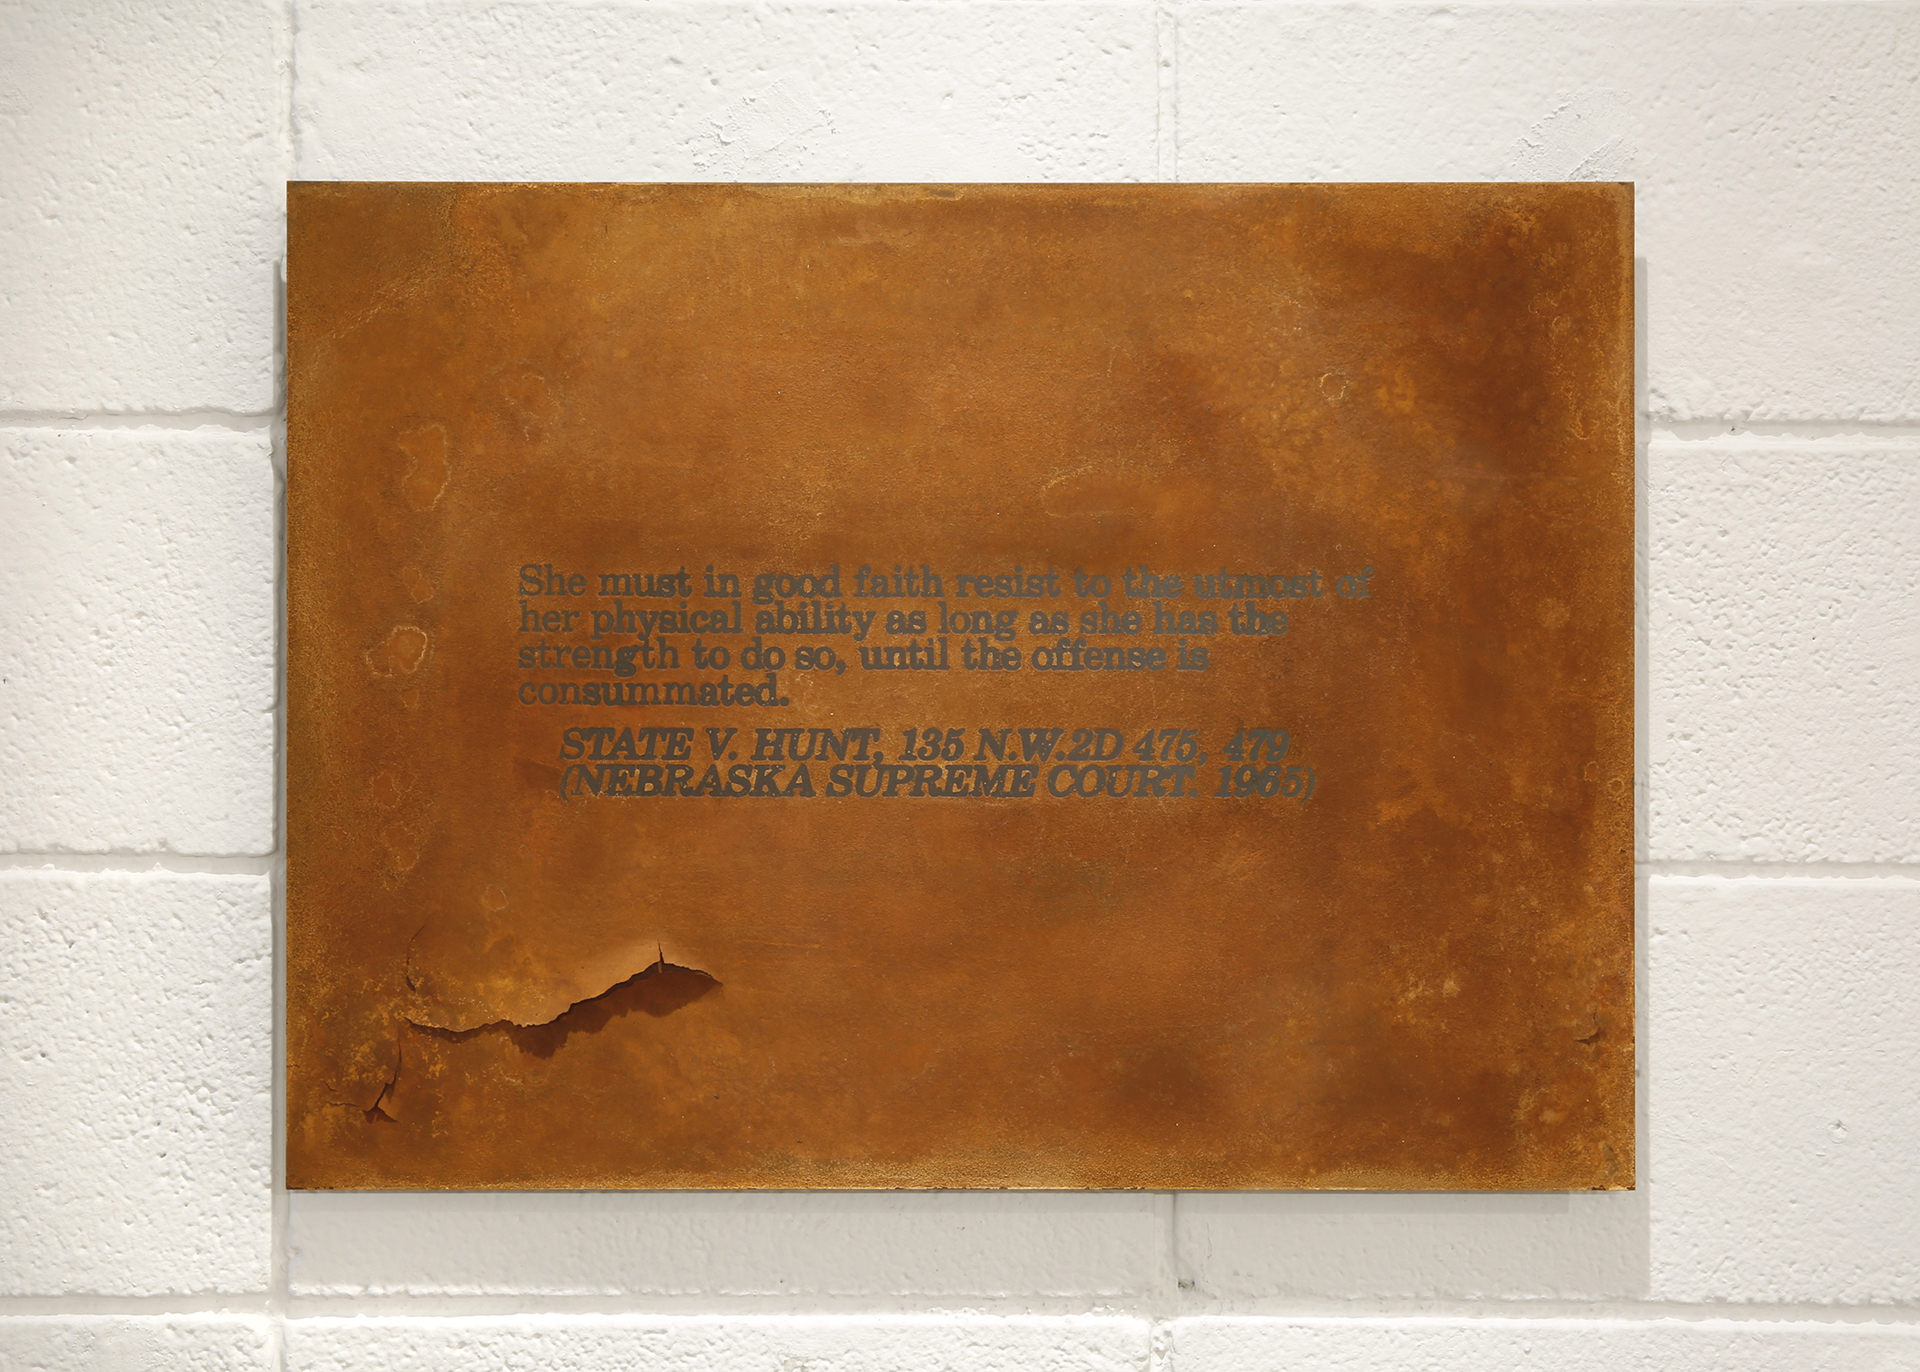 Screenprint resist on steel with rust patina, text from 1965 Nebraska Supreme Court rape case appeal ruling